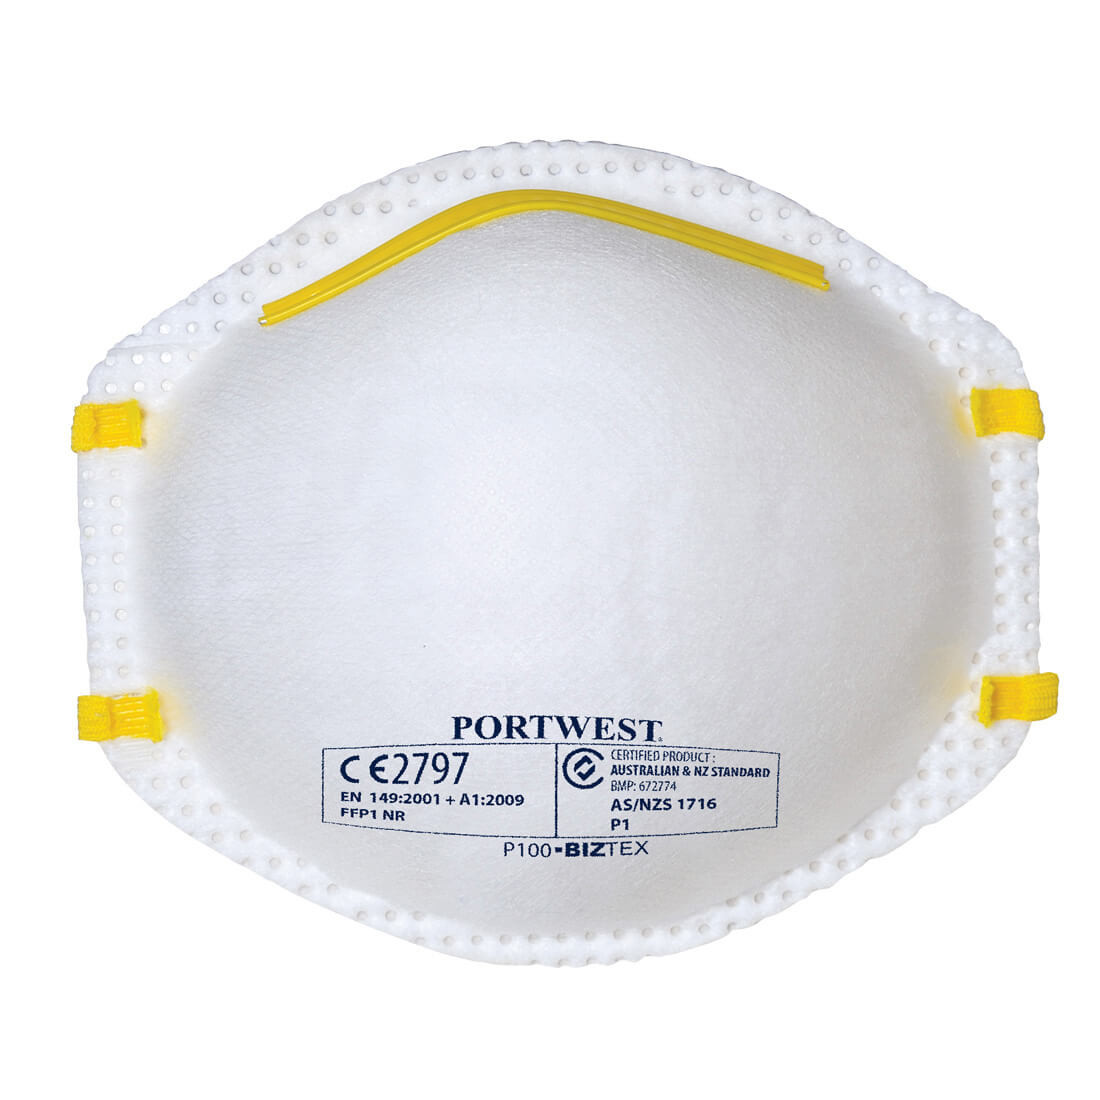 FFP1 Dust Mist Respirator - Personal protection